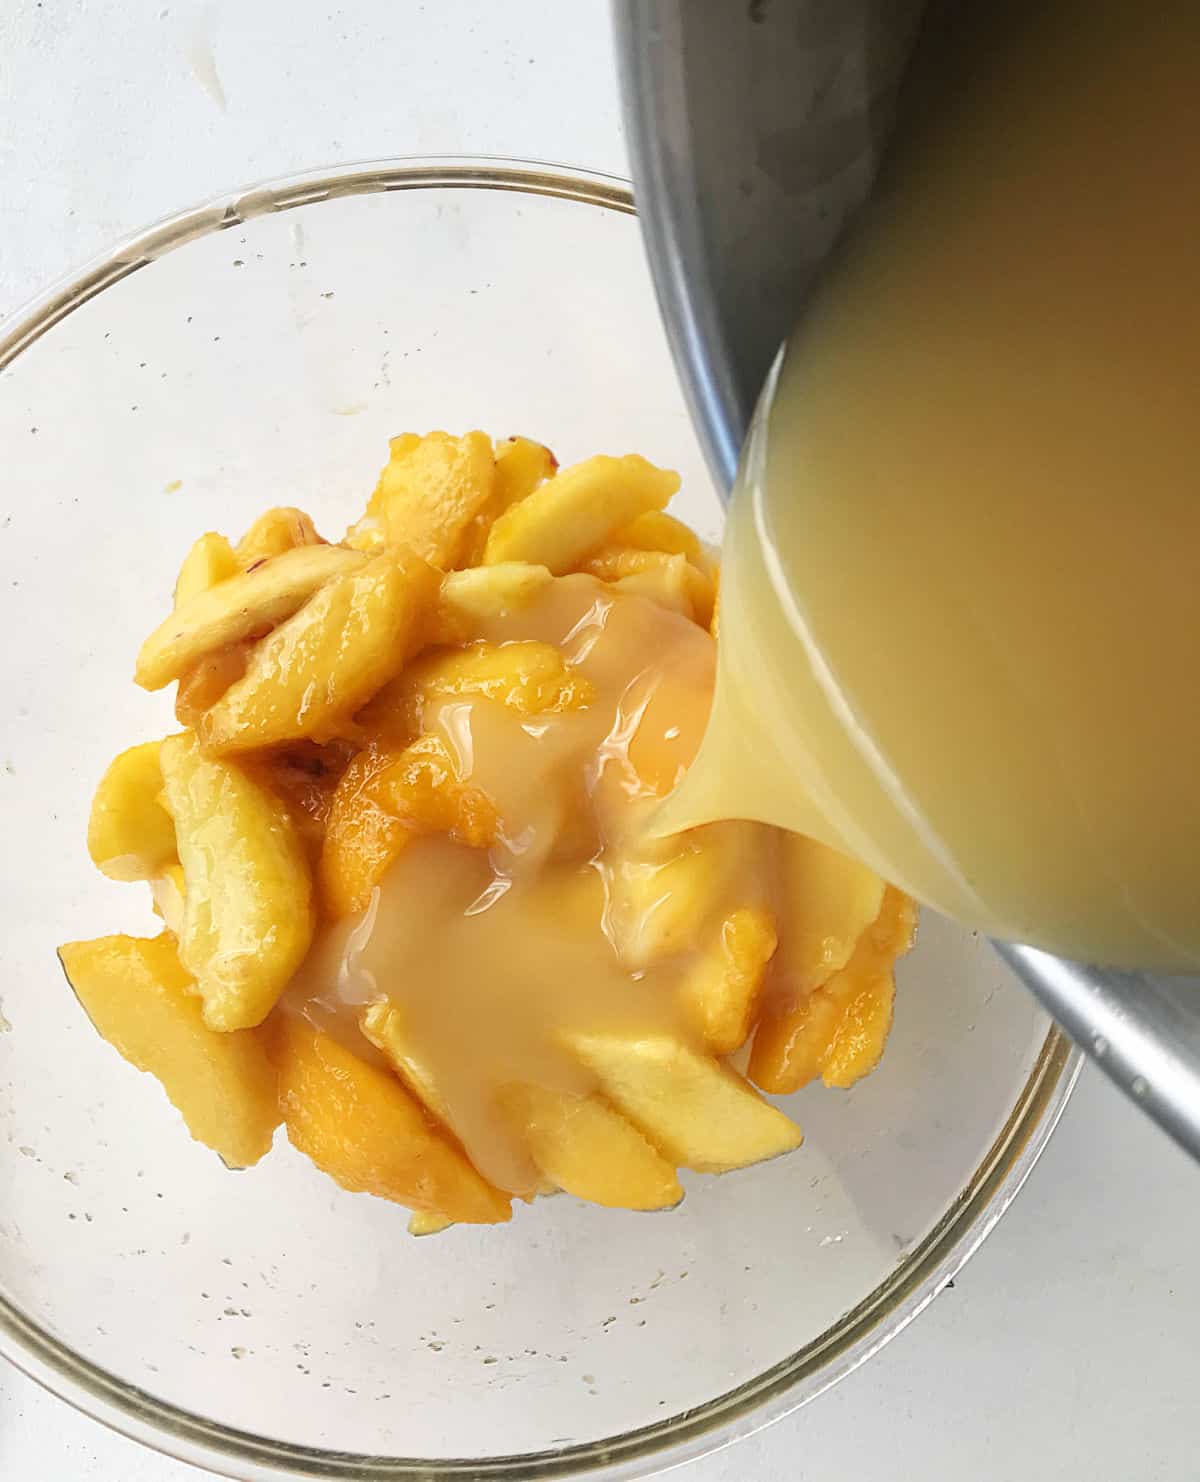 Syrup is added to fresh peach slices in glass bowl on white surface